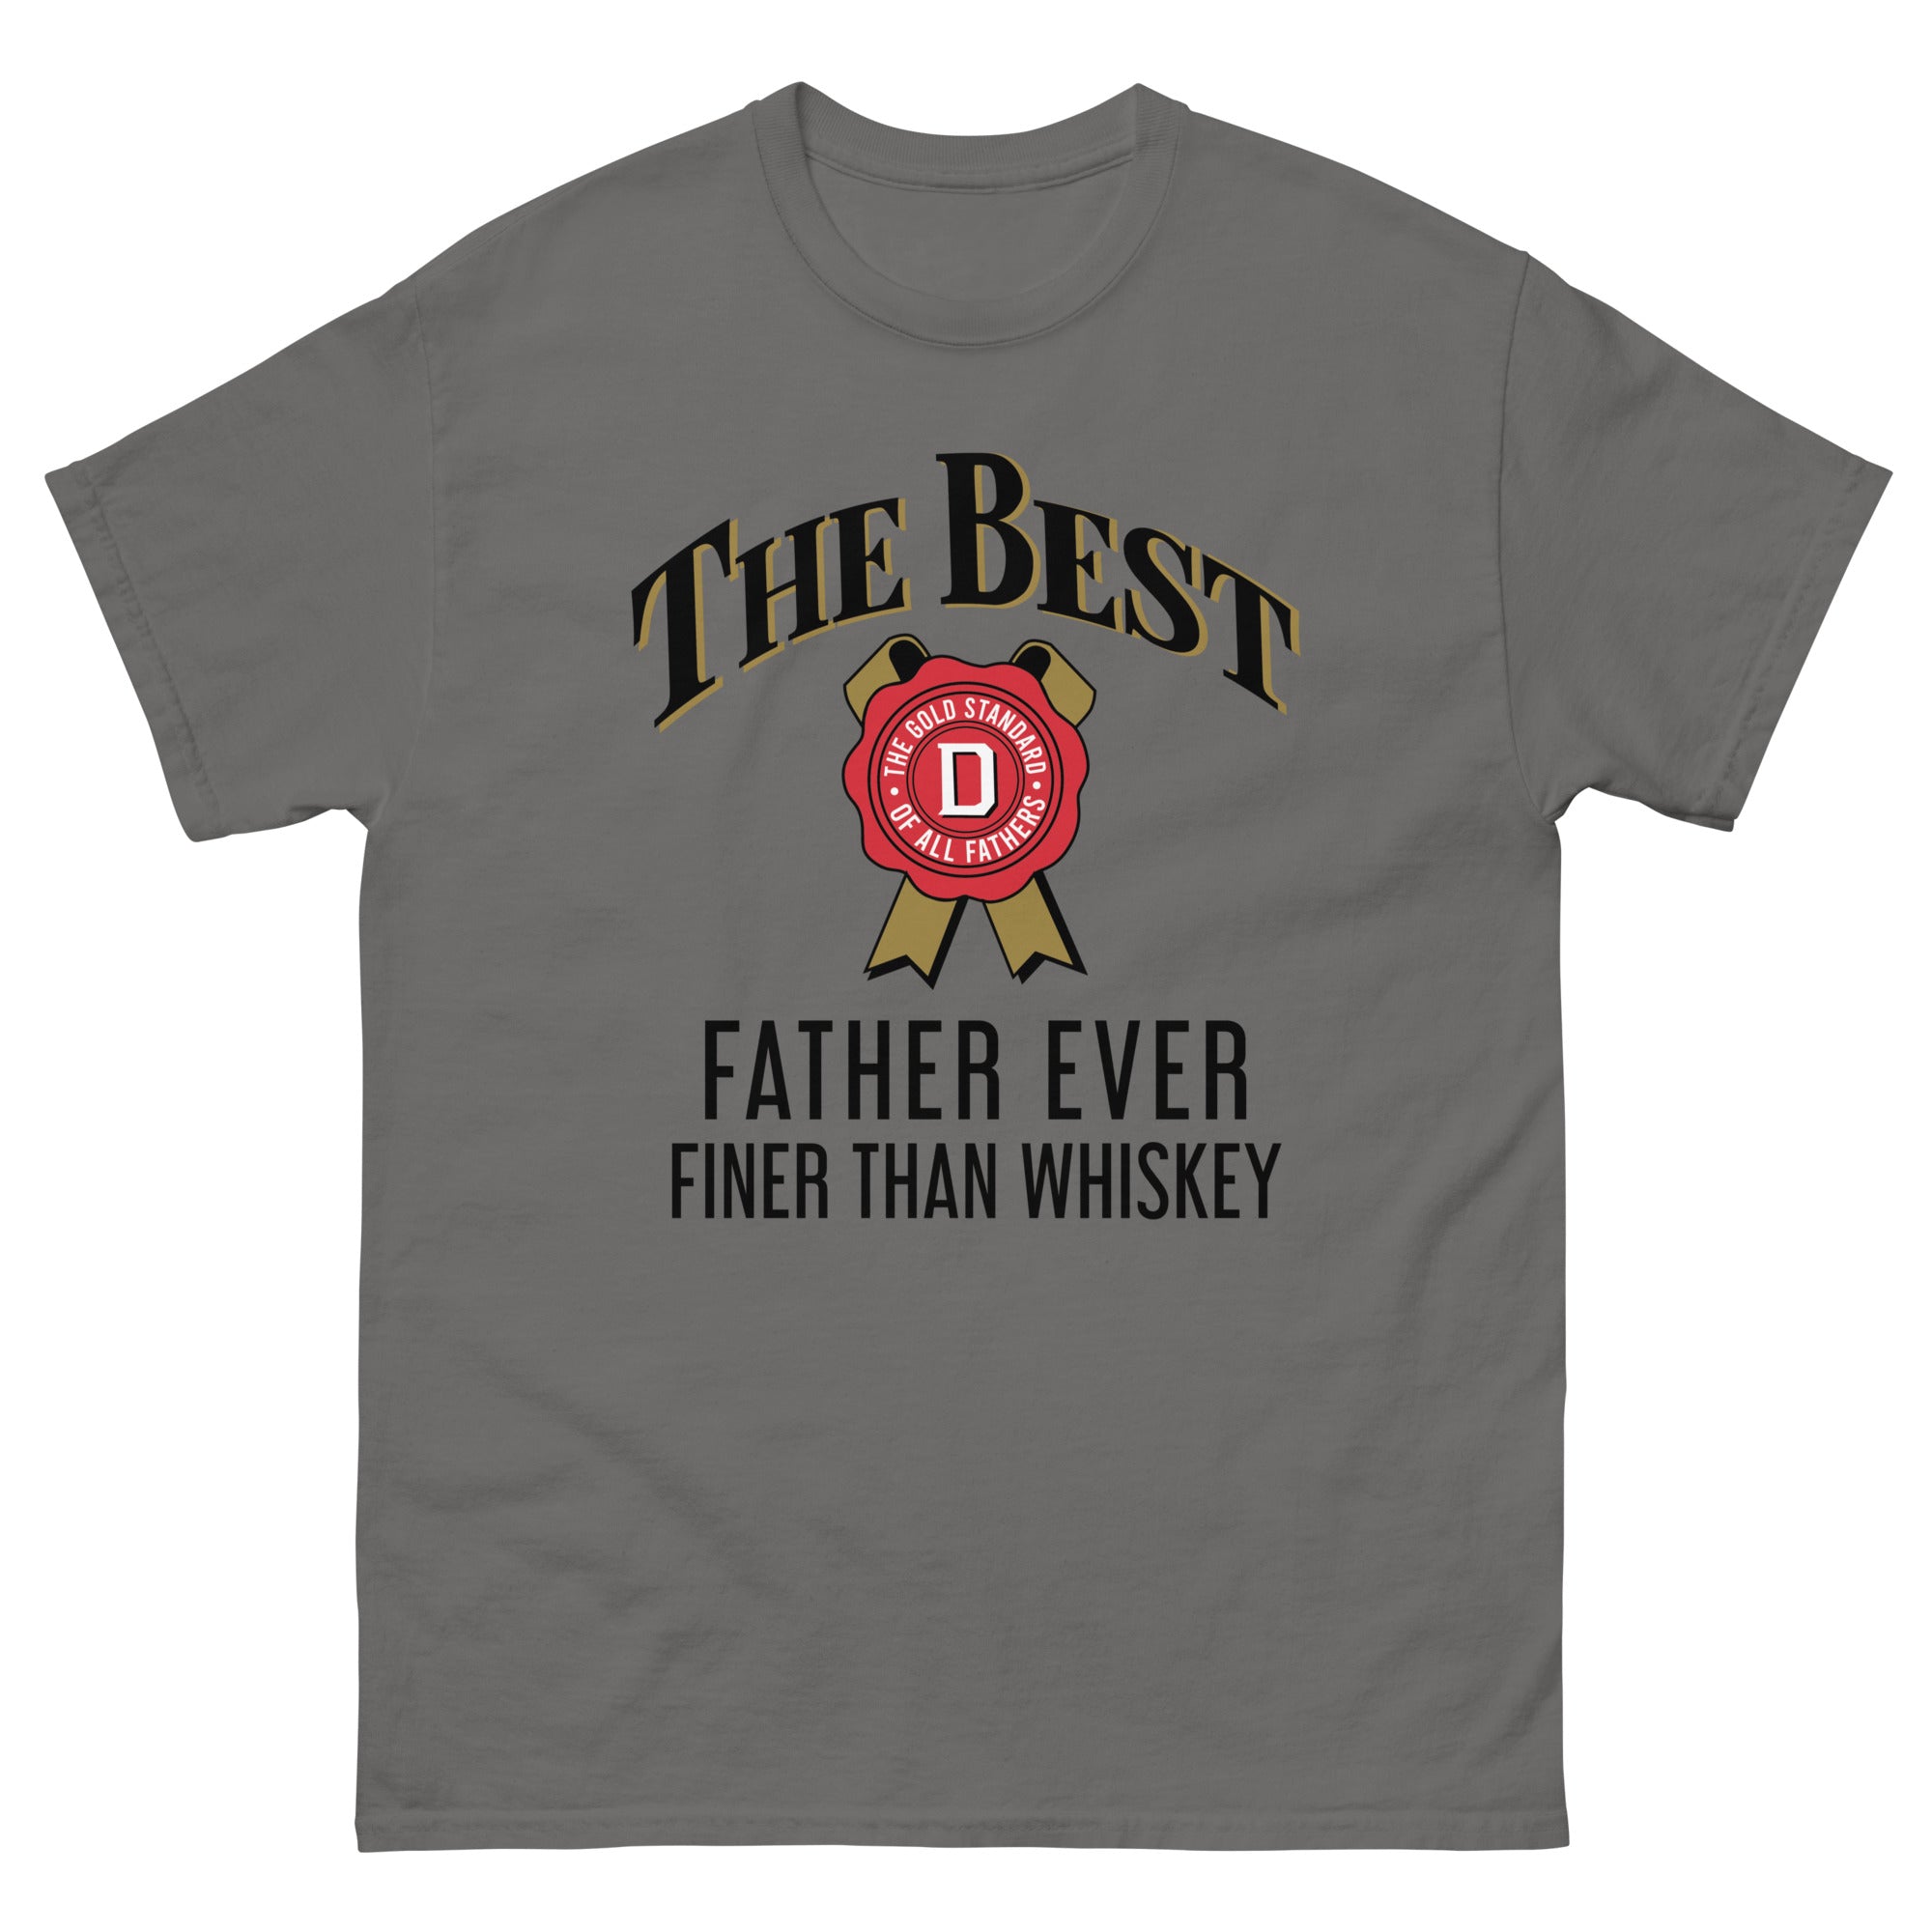 Best Father Ever, Finer Than Whiskey T-Shirt